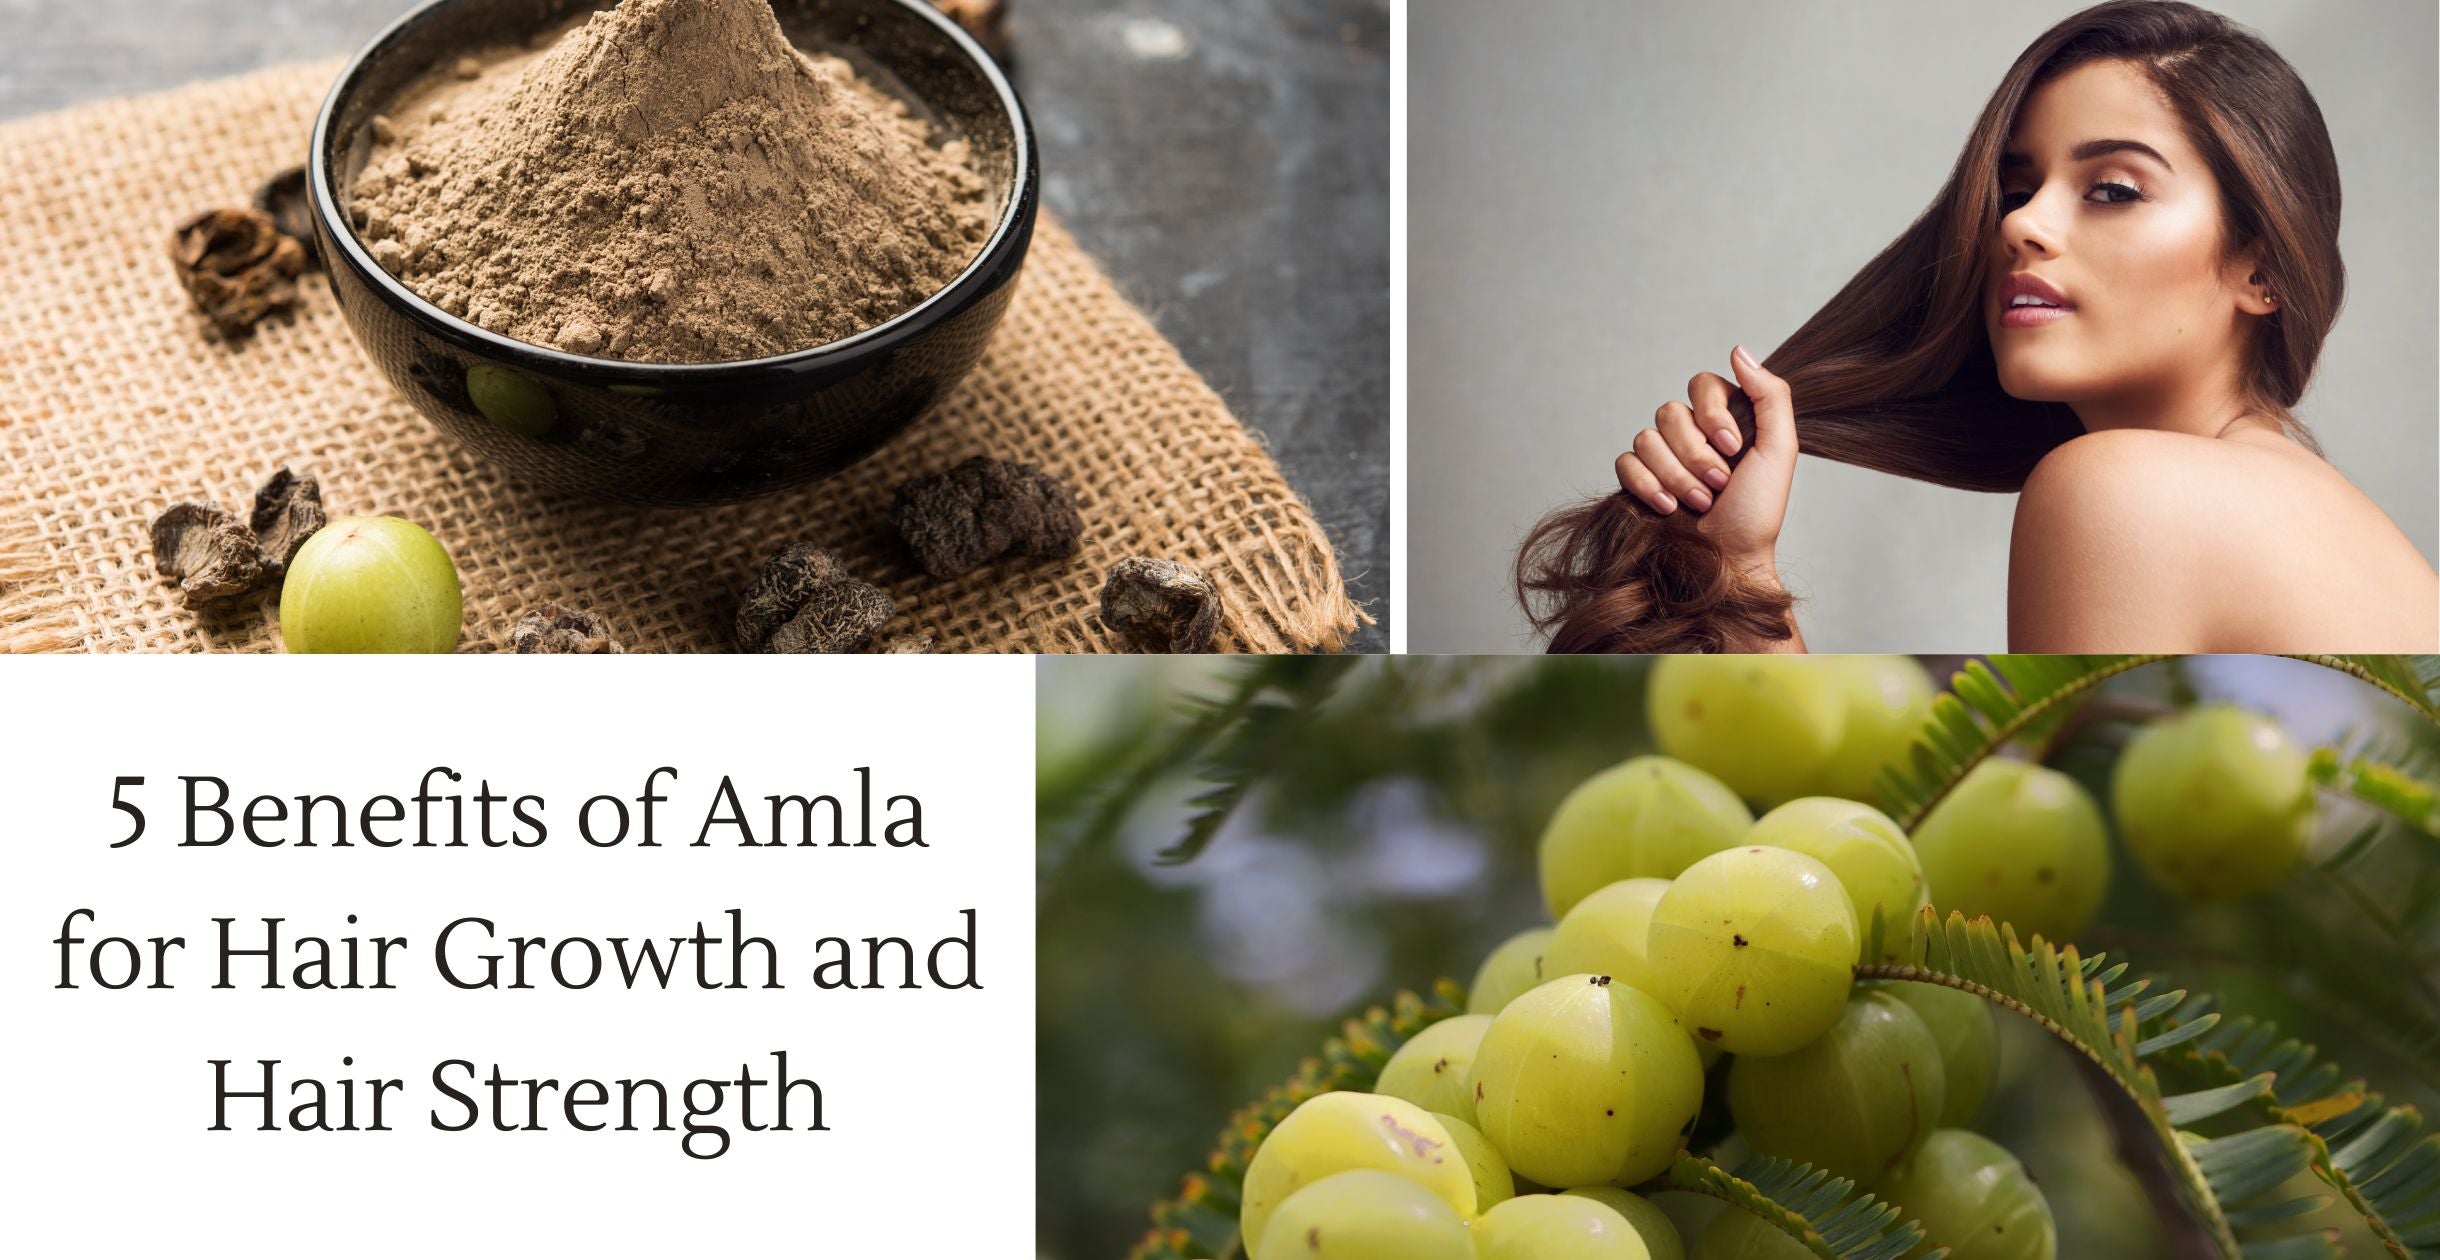 5 Benefits of Amla for Hair Growth and Hair Strength